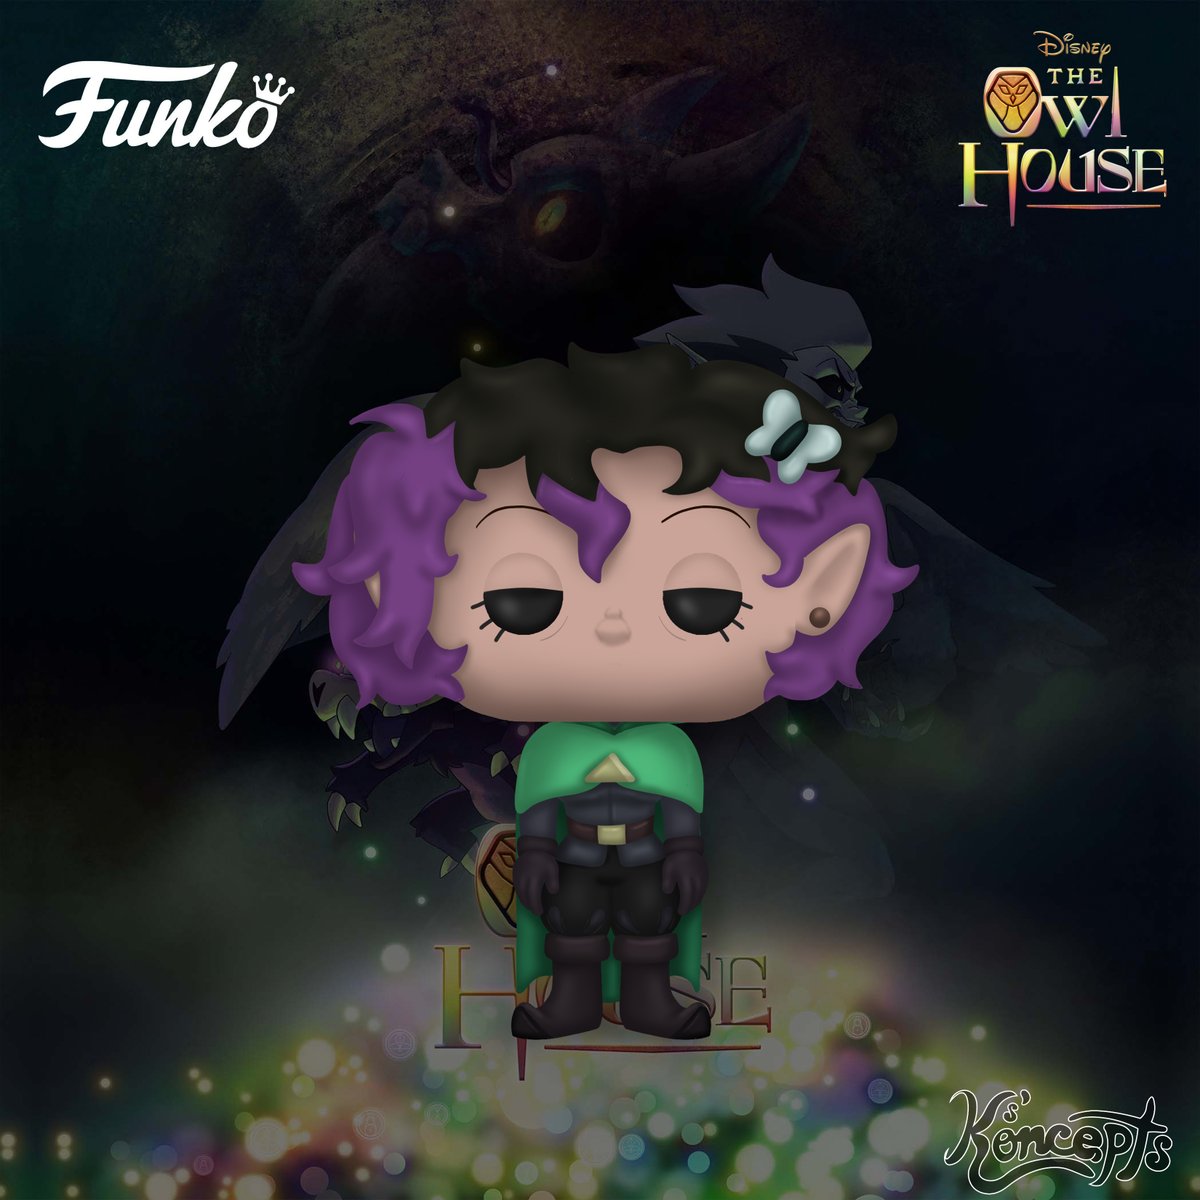 #529 Funko Pop! Box & Pop Concept: Lina (The Owl House)              
@Khaliarart Thank you for all of your hard work on the show, us fans will miss it and love it always

#theowlhouse #owlhouse #danaterrace #lina #khaliarart #khaliar #watchinganddreaming #disney #ksfunkoconcepts